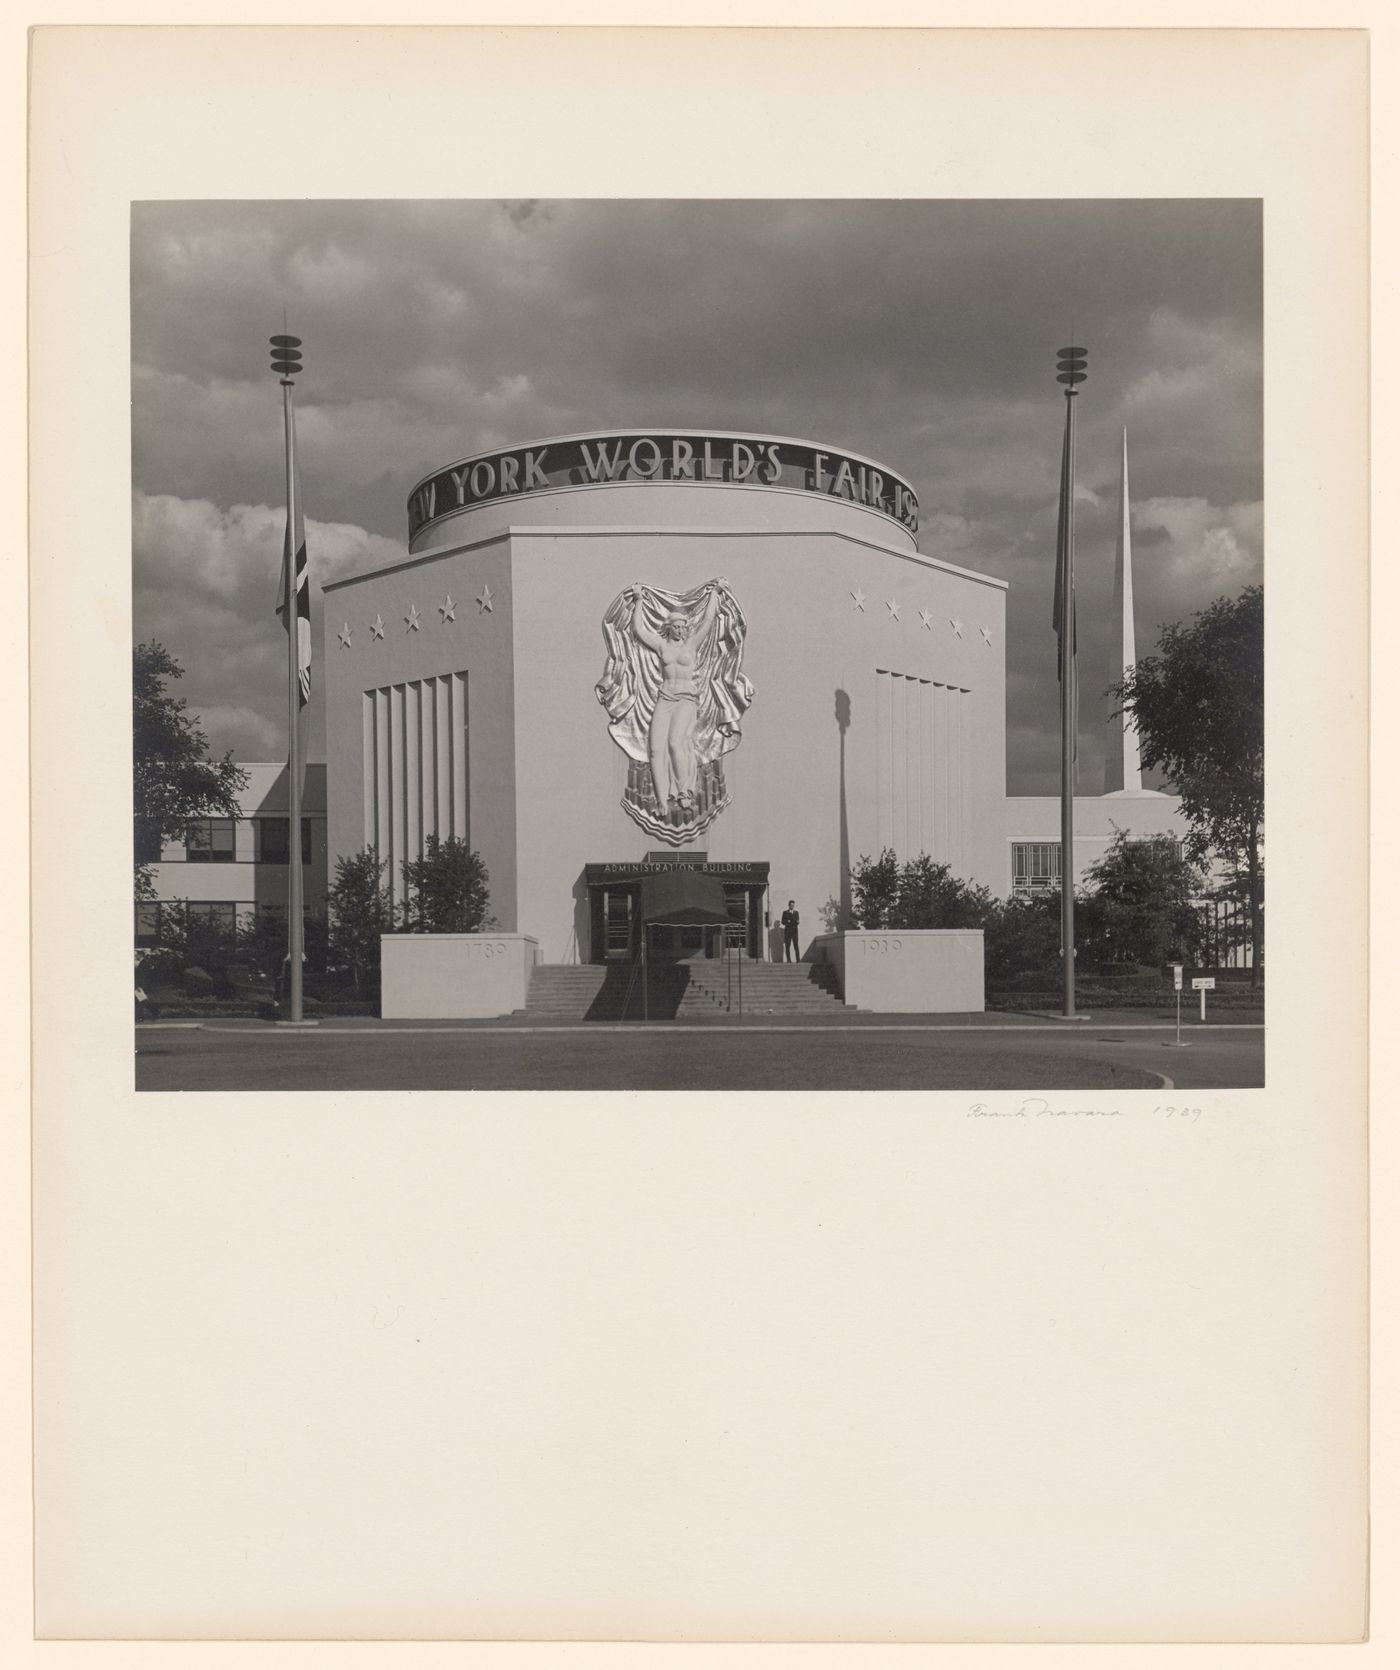 New York World's Fair (1939-1940): Administration Building, frontal view